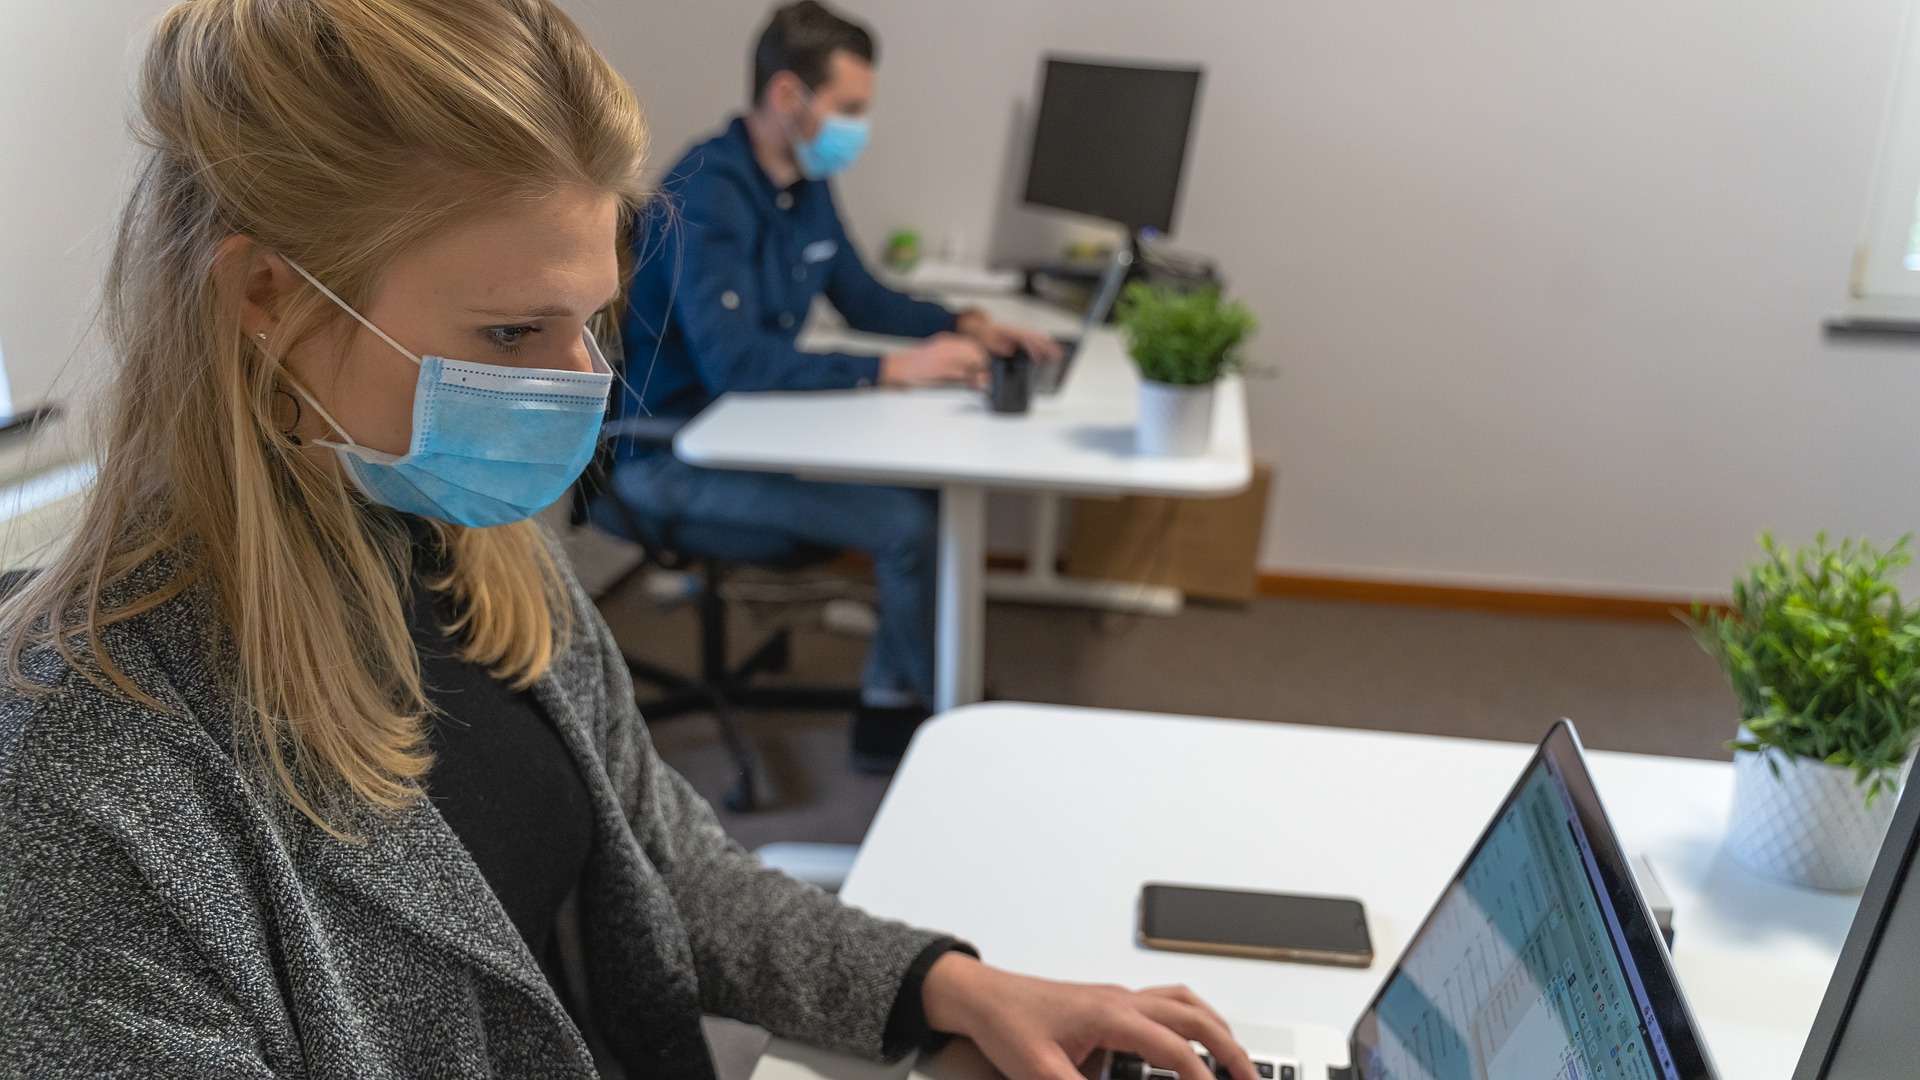 Two office workers work at desktop computers and wear masks.